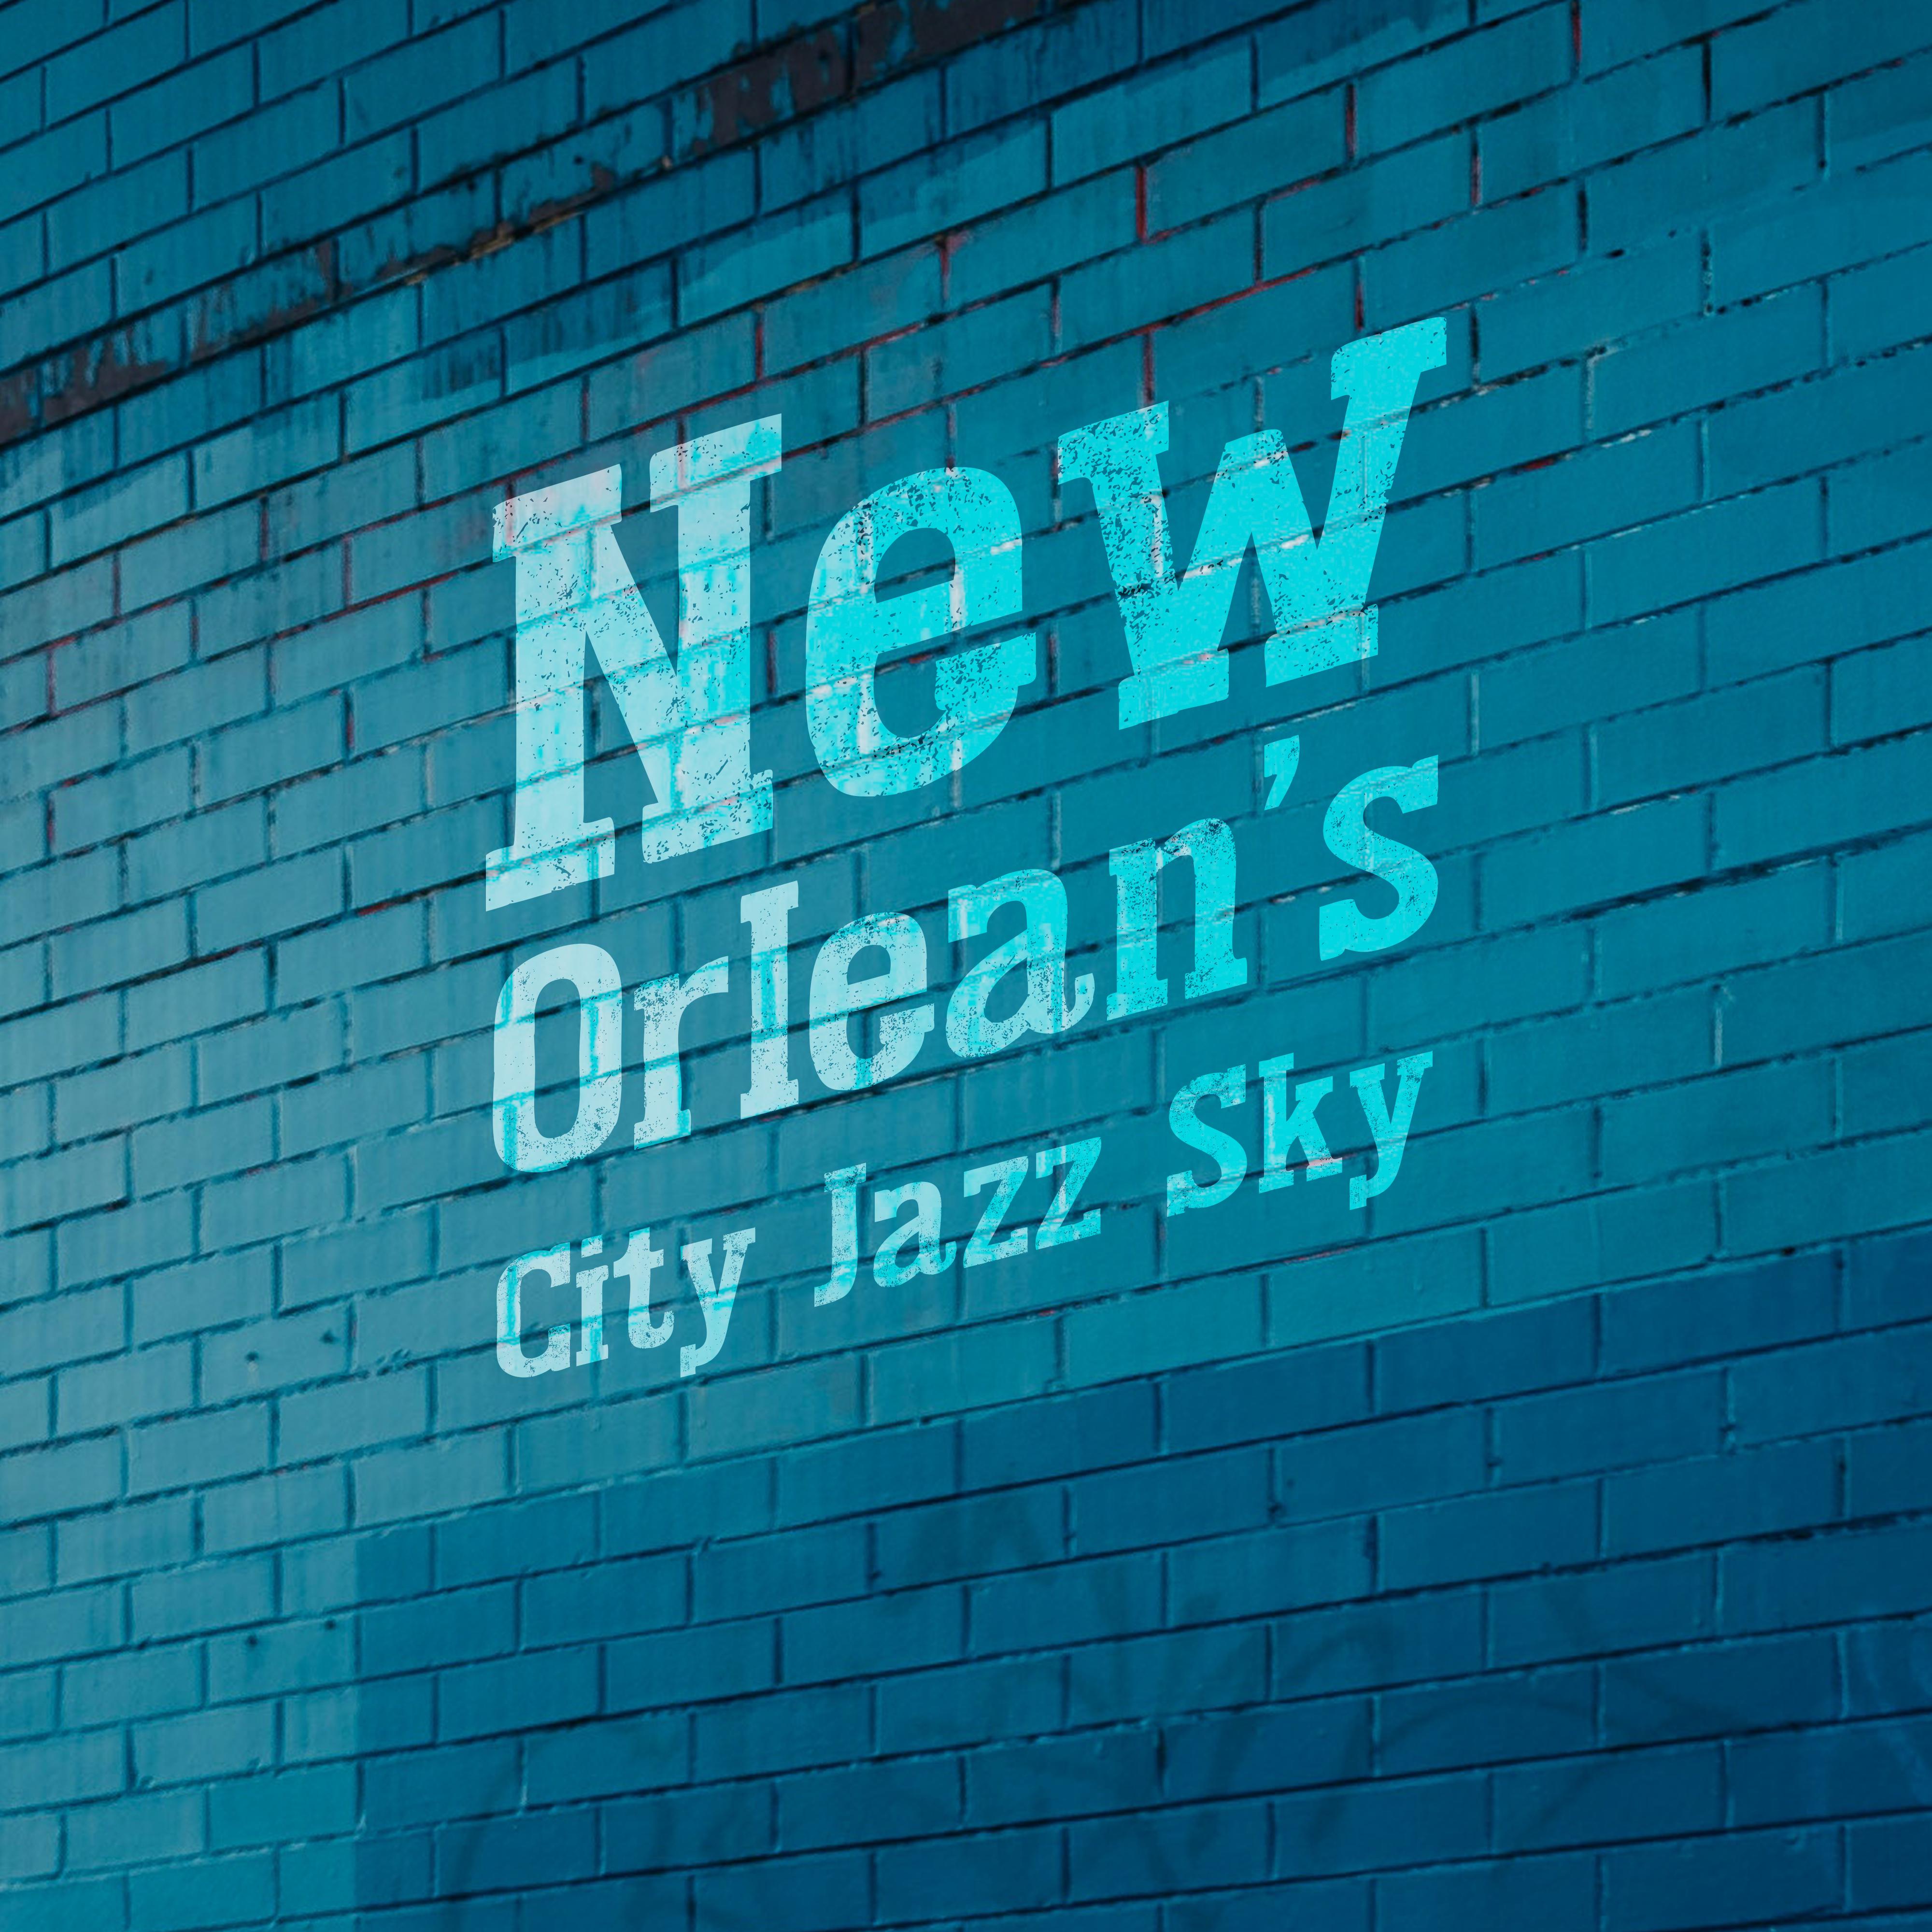 New Orlean's City Jazz Sky: Instrumental Smooth Jazz Music Compilation 2019 with Vintage Sounds & Melodies of Piano, Guitar & Many More